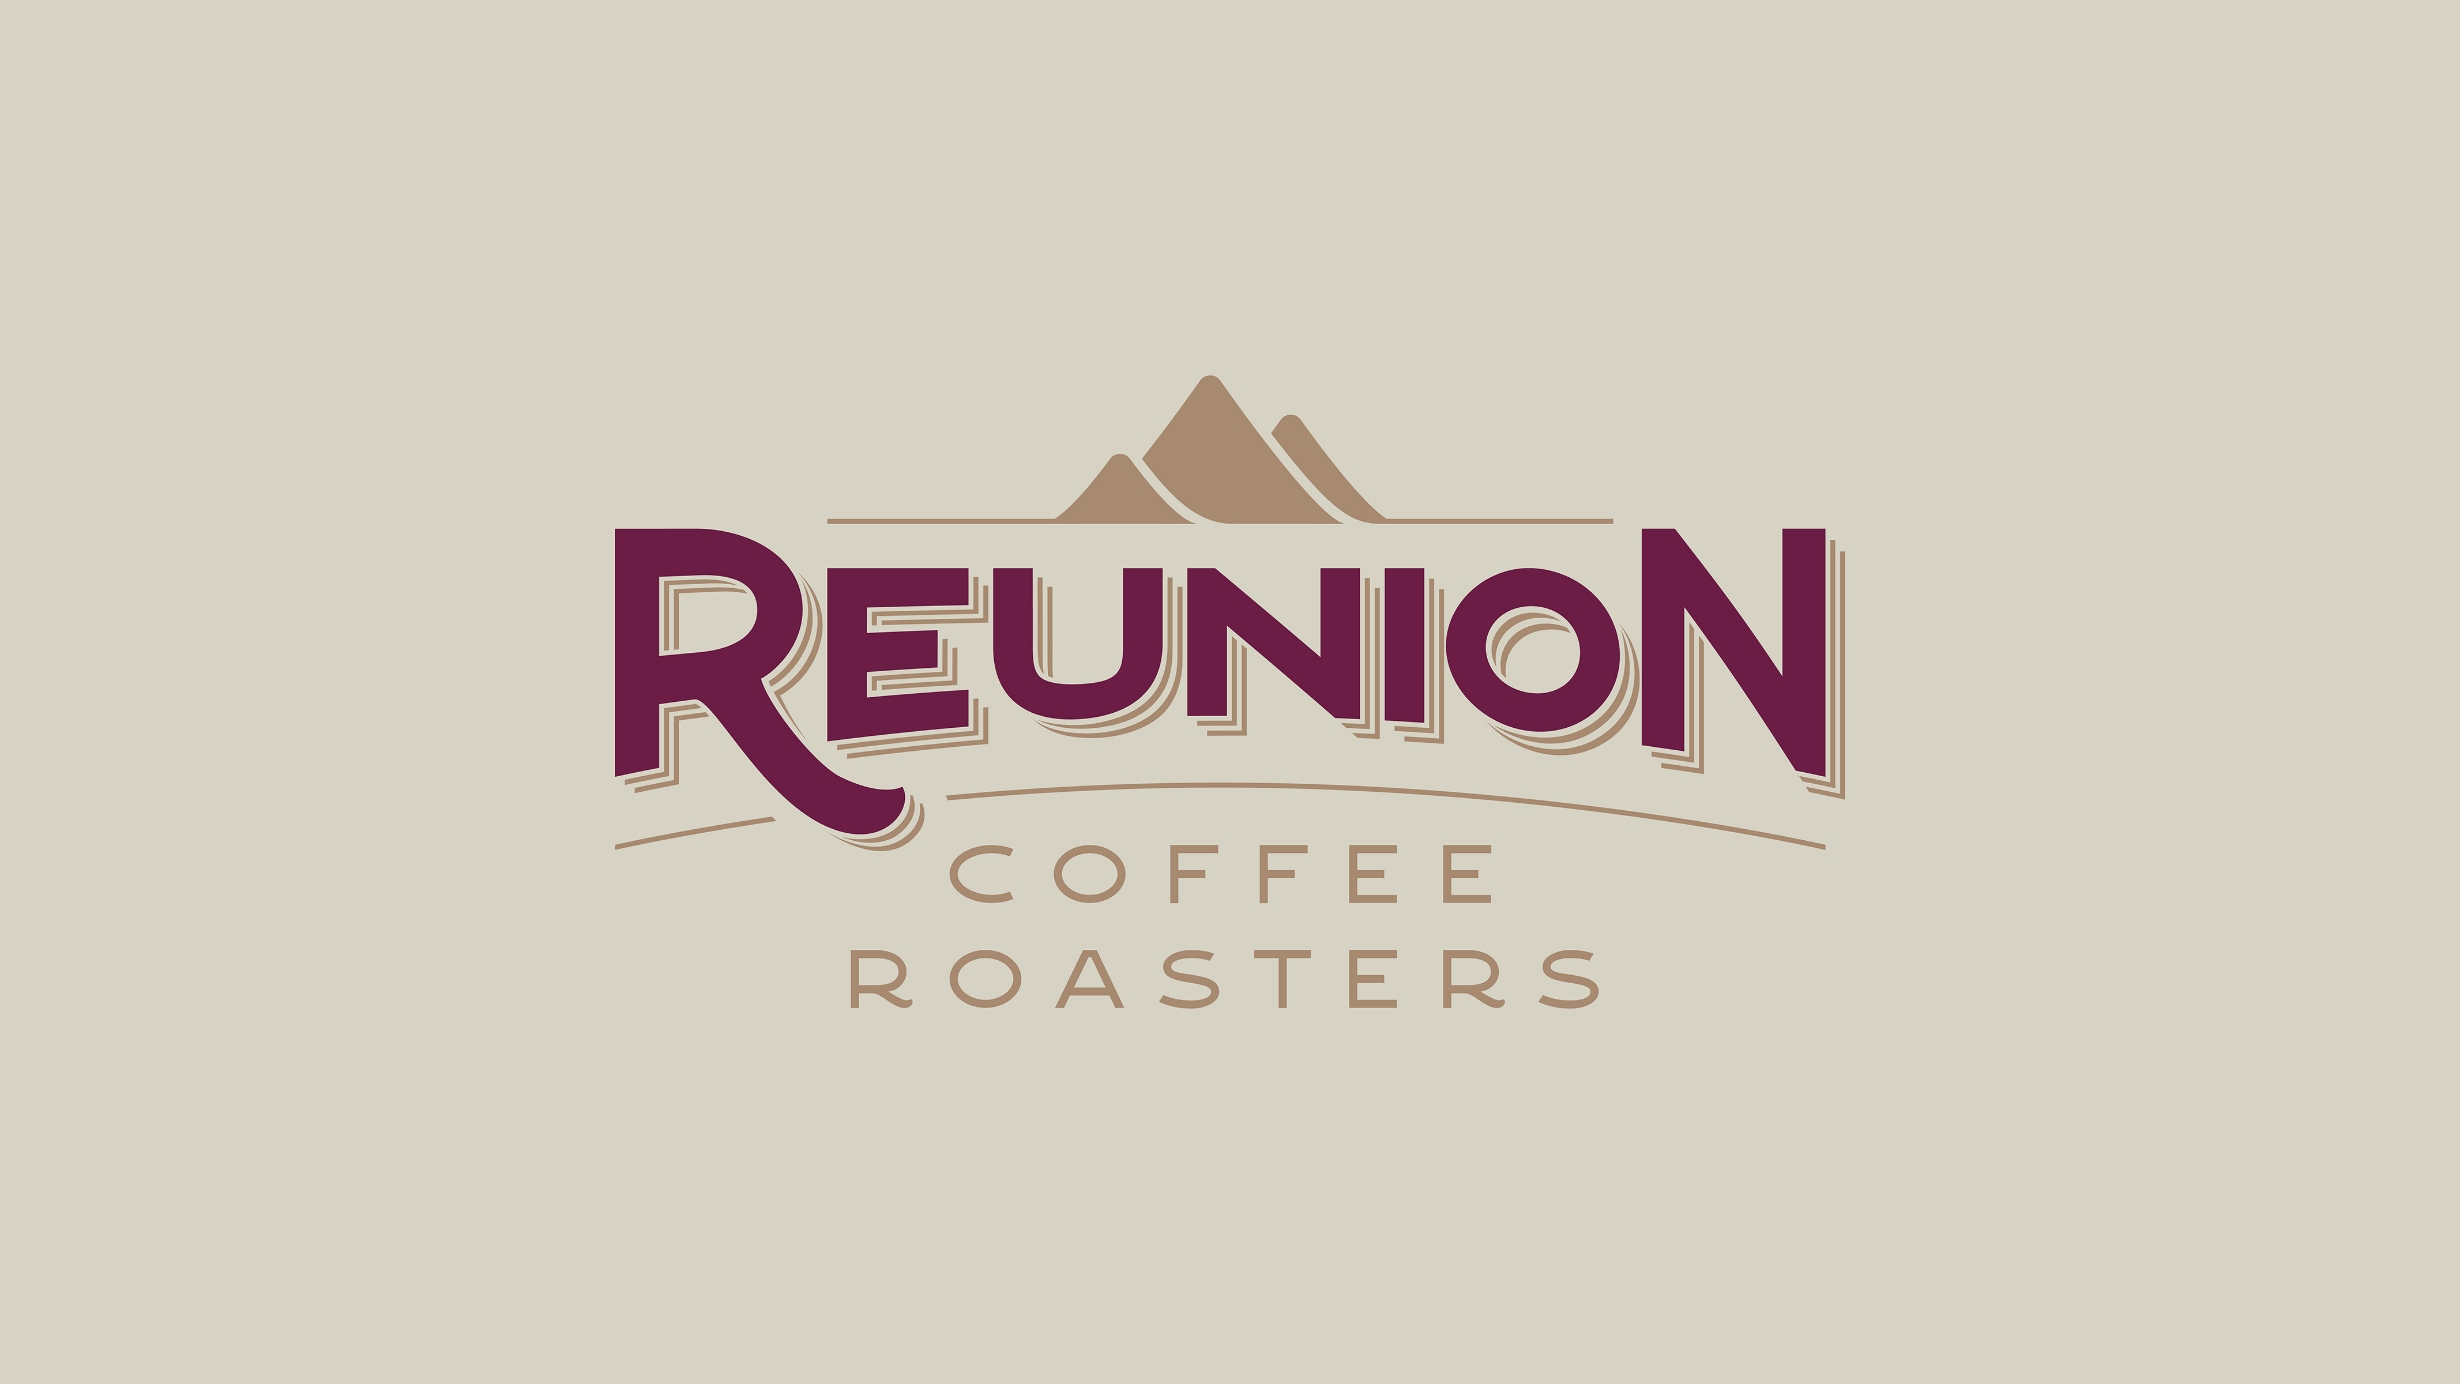 A Brand Refresh for Canada’s Largest Independent Coffee Roaster